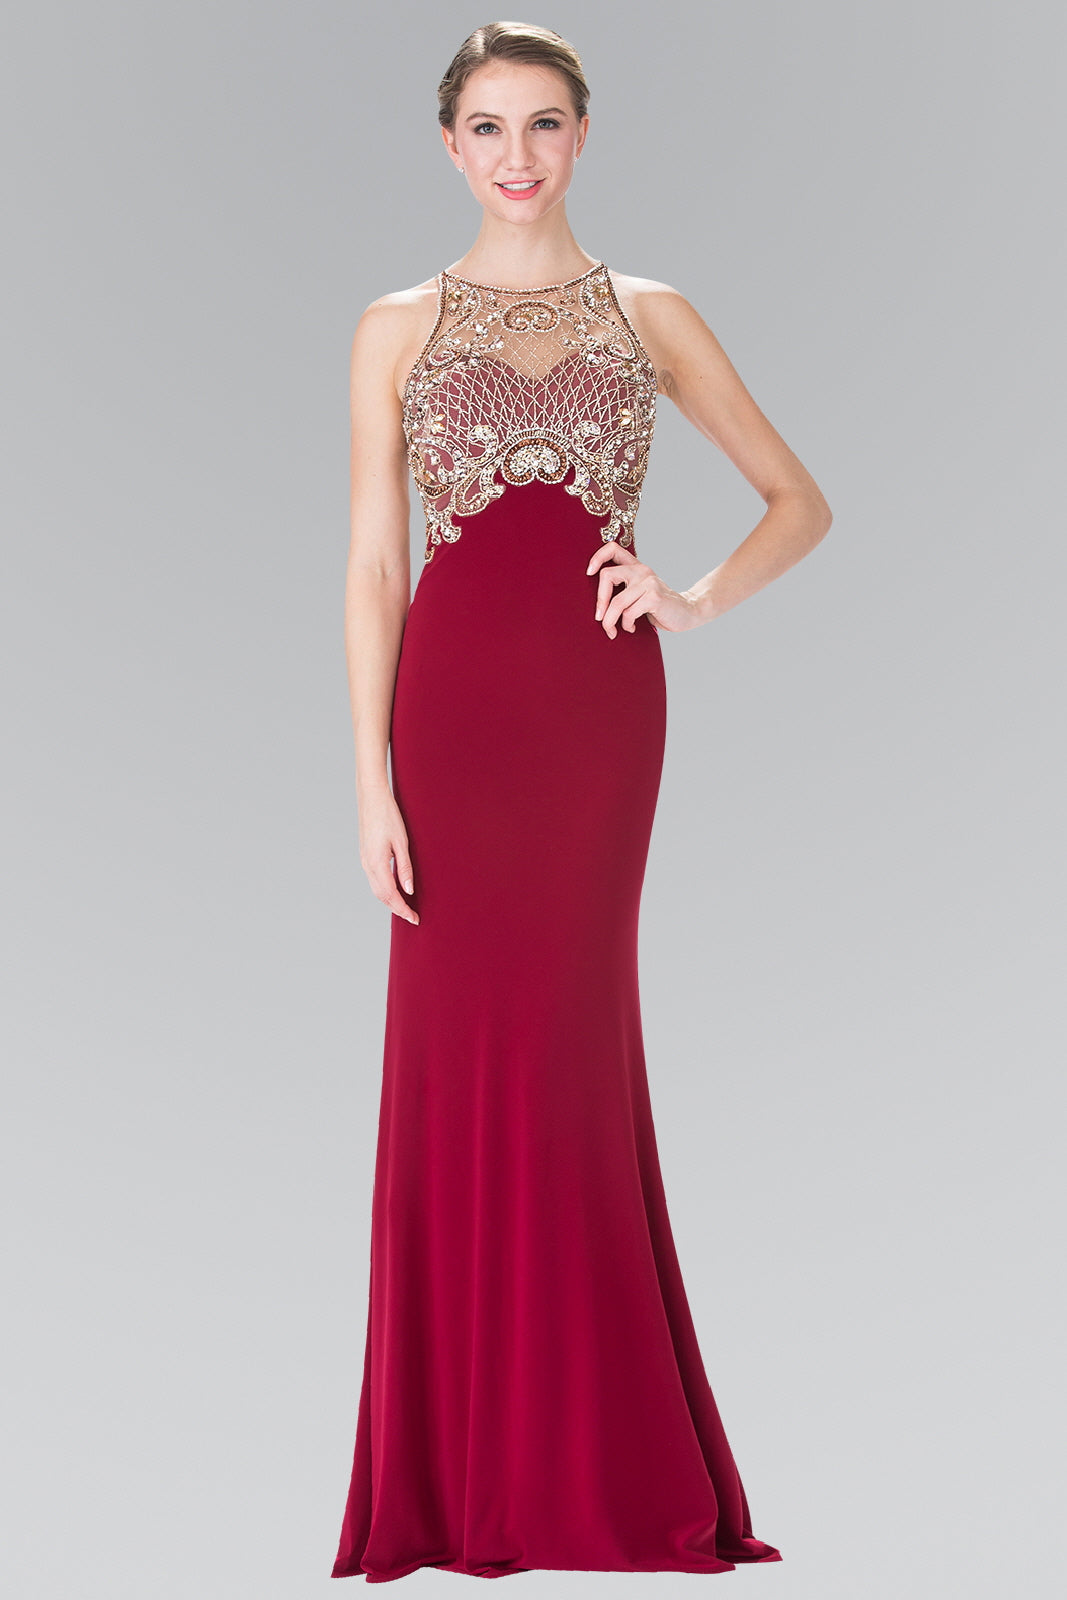 Prom Long Dress Evening Party Gown for $250.99 – The Dress Outlet